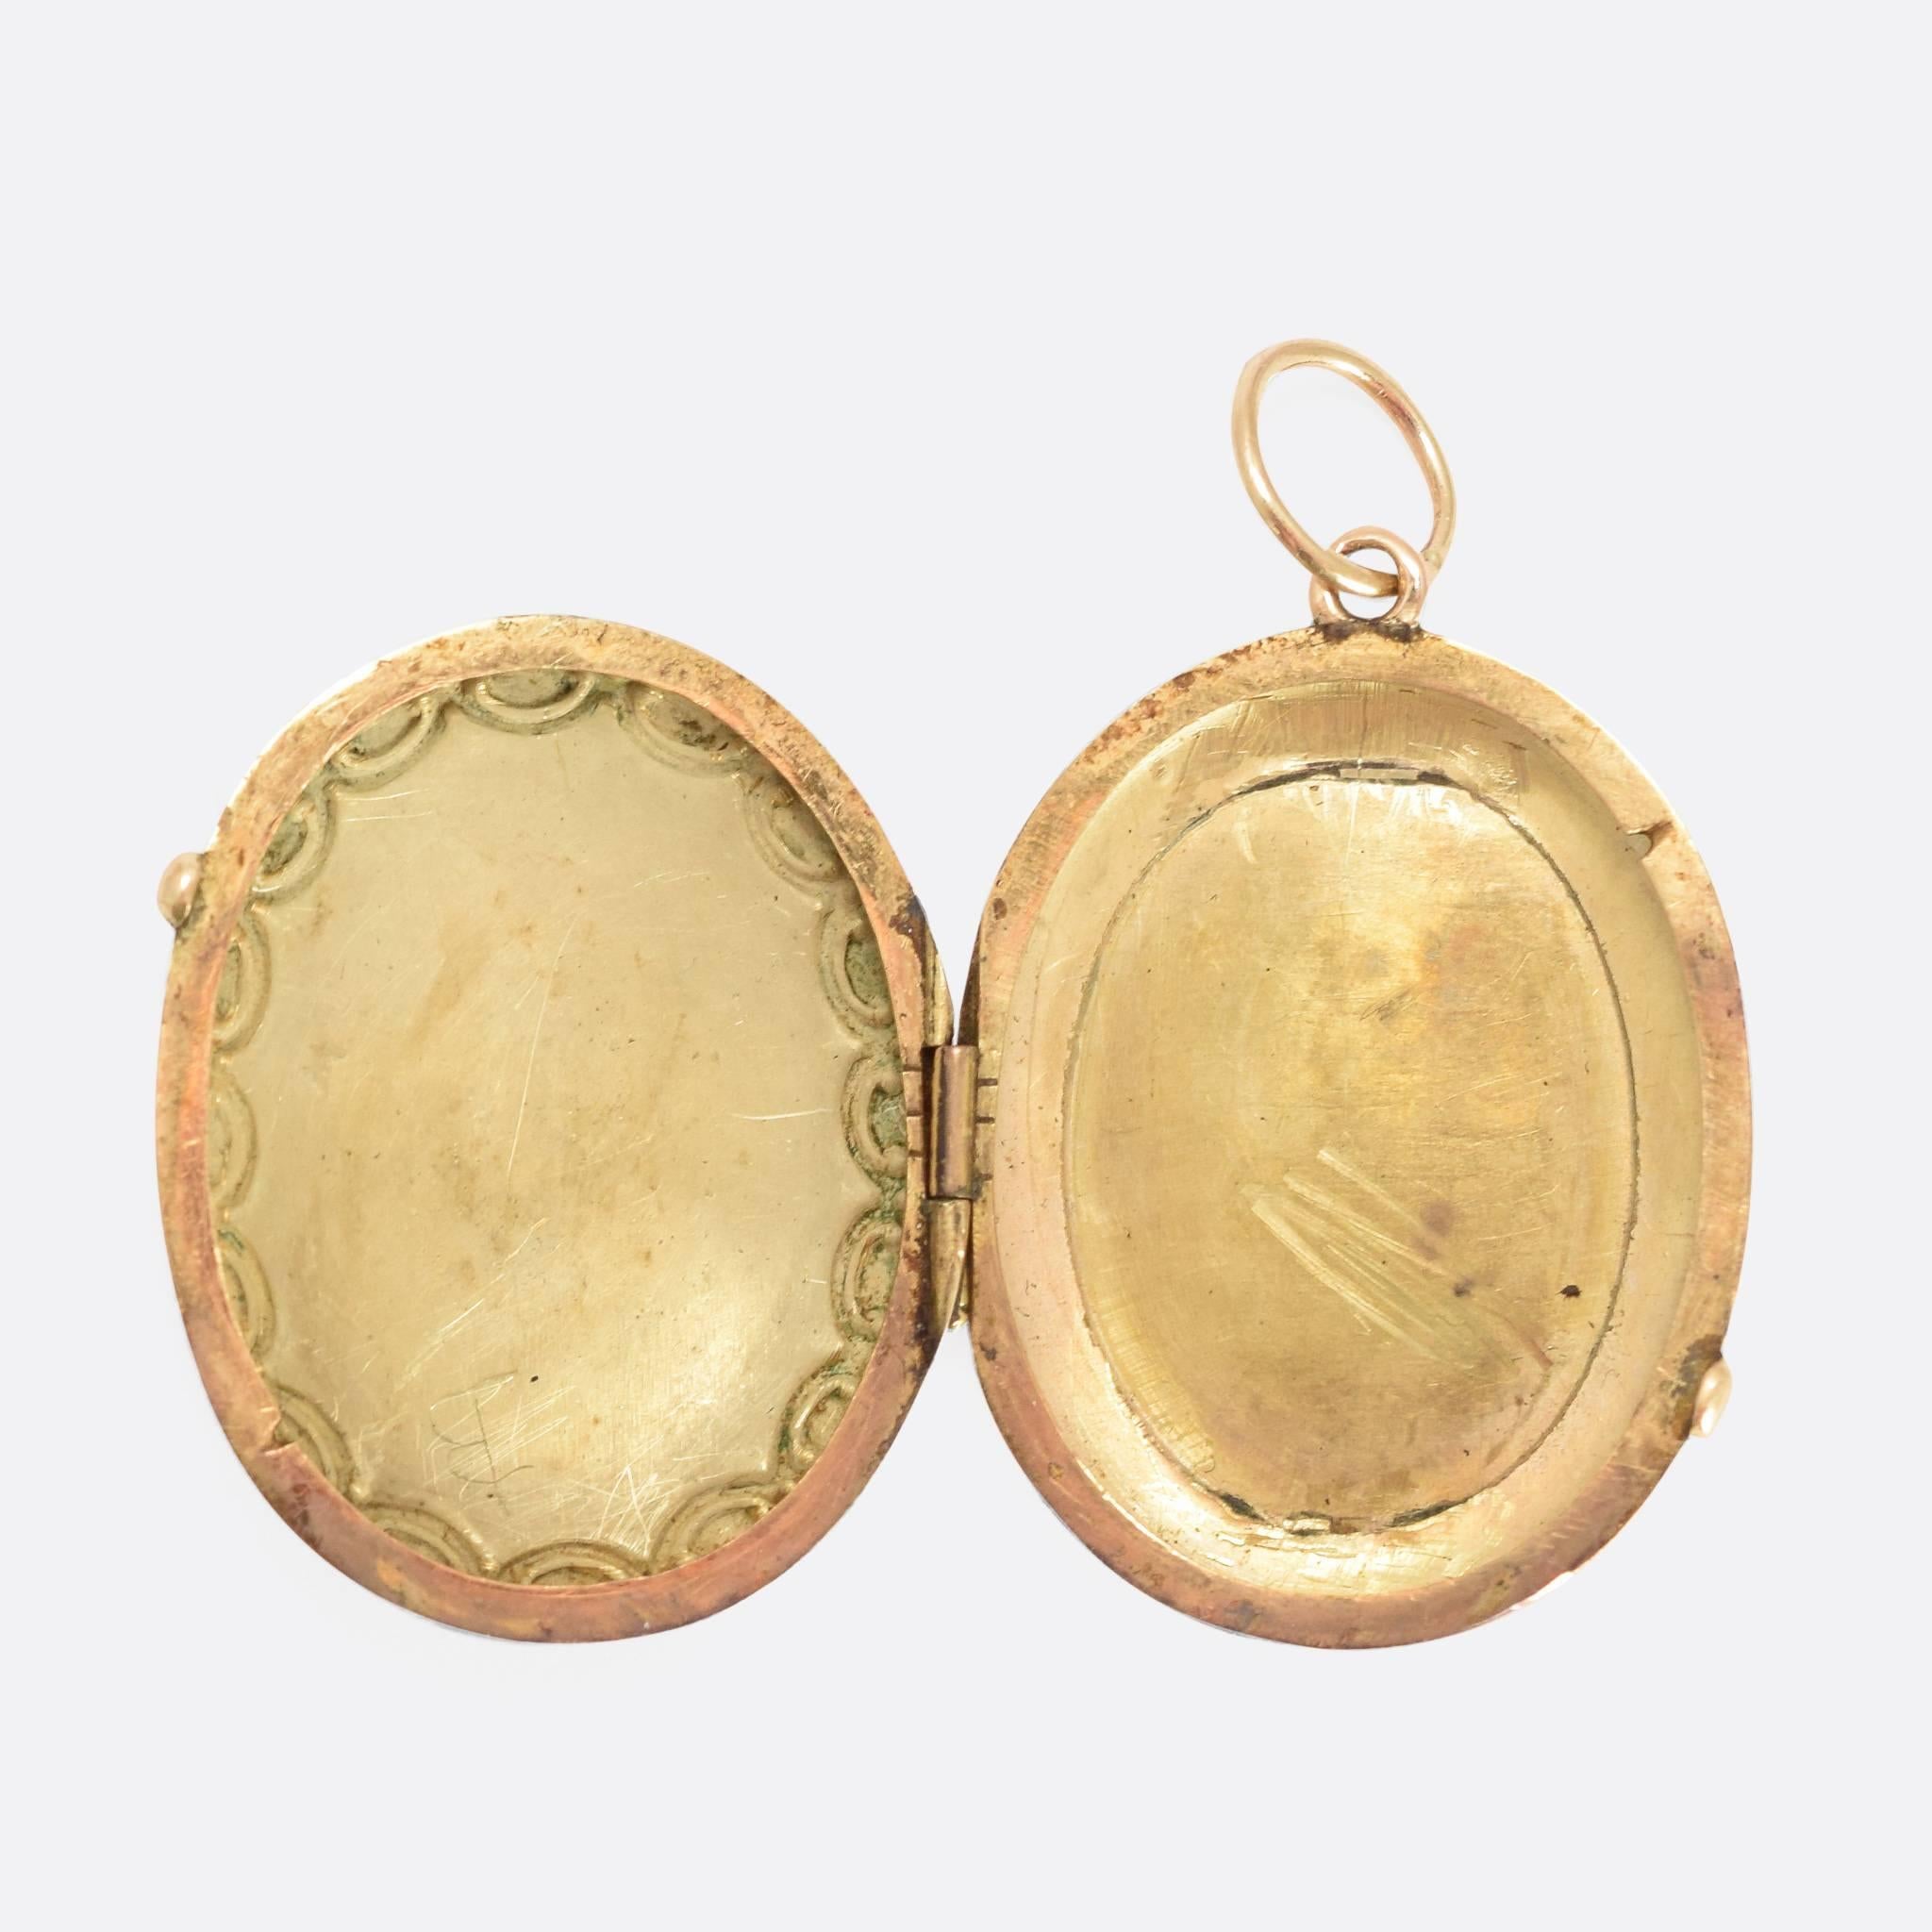 This exquisite early Victorian locket is modelled in 14ct gold, and finished with a charming enamelled portrait. The lady depicted is wearing a vivid red dress, with matching head-wear set with four (real!) rose cut diamonds. She also wears flowers